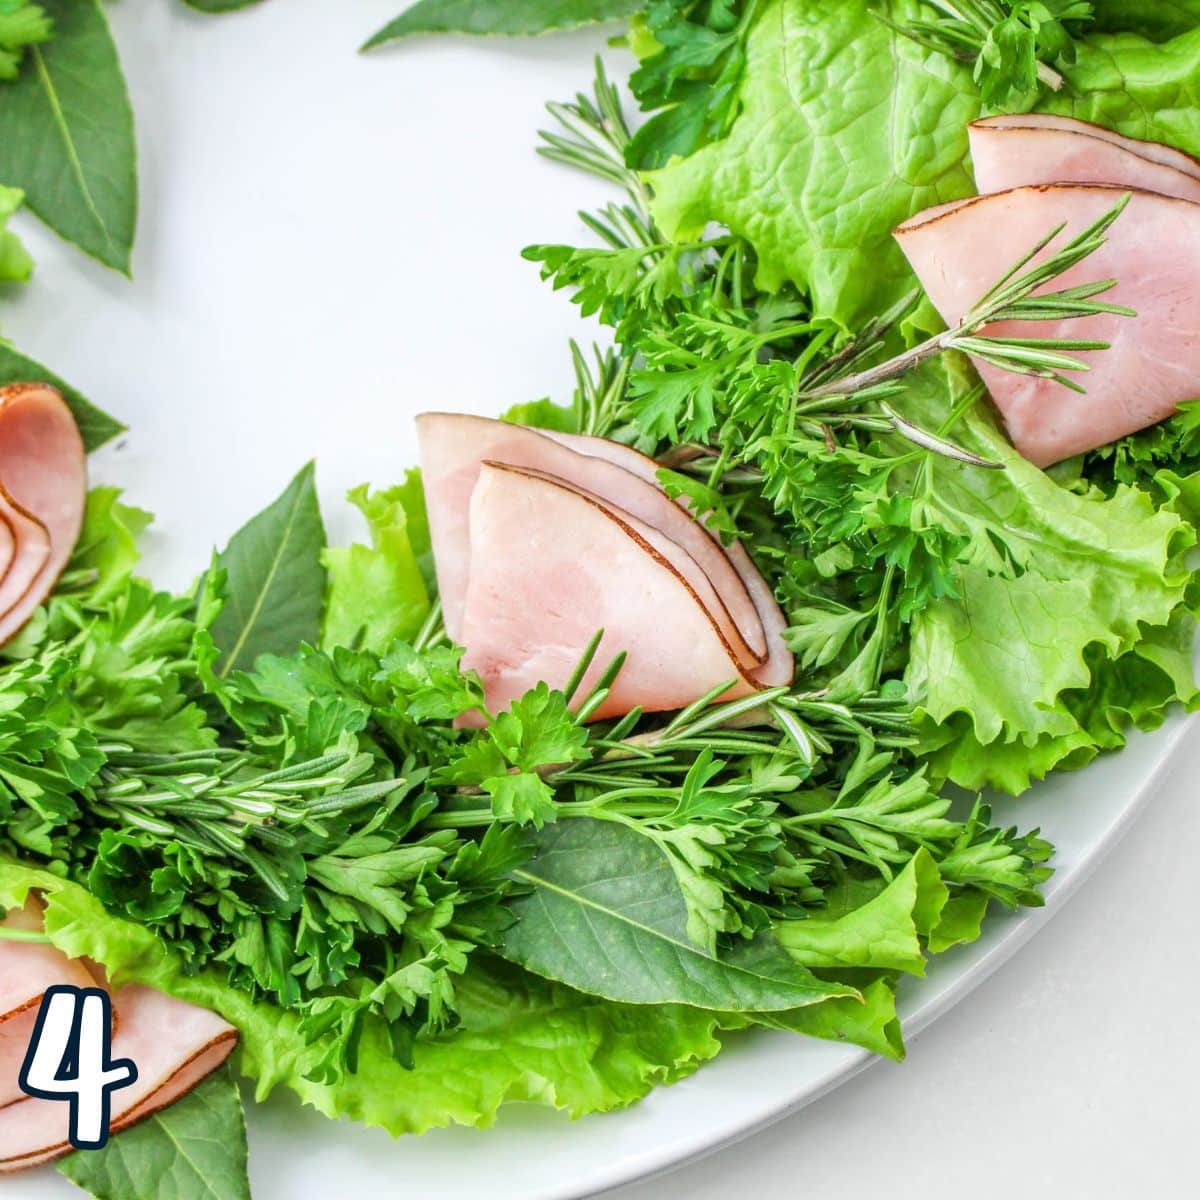 A plate with ham, lettuce and herbs on it.